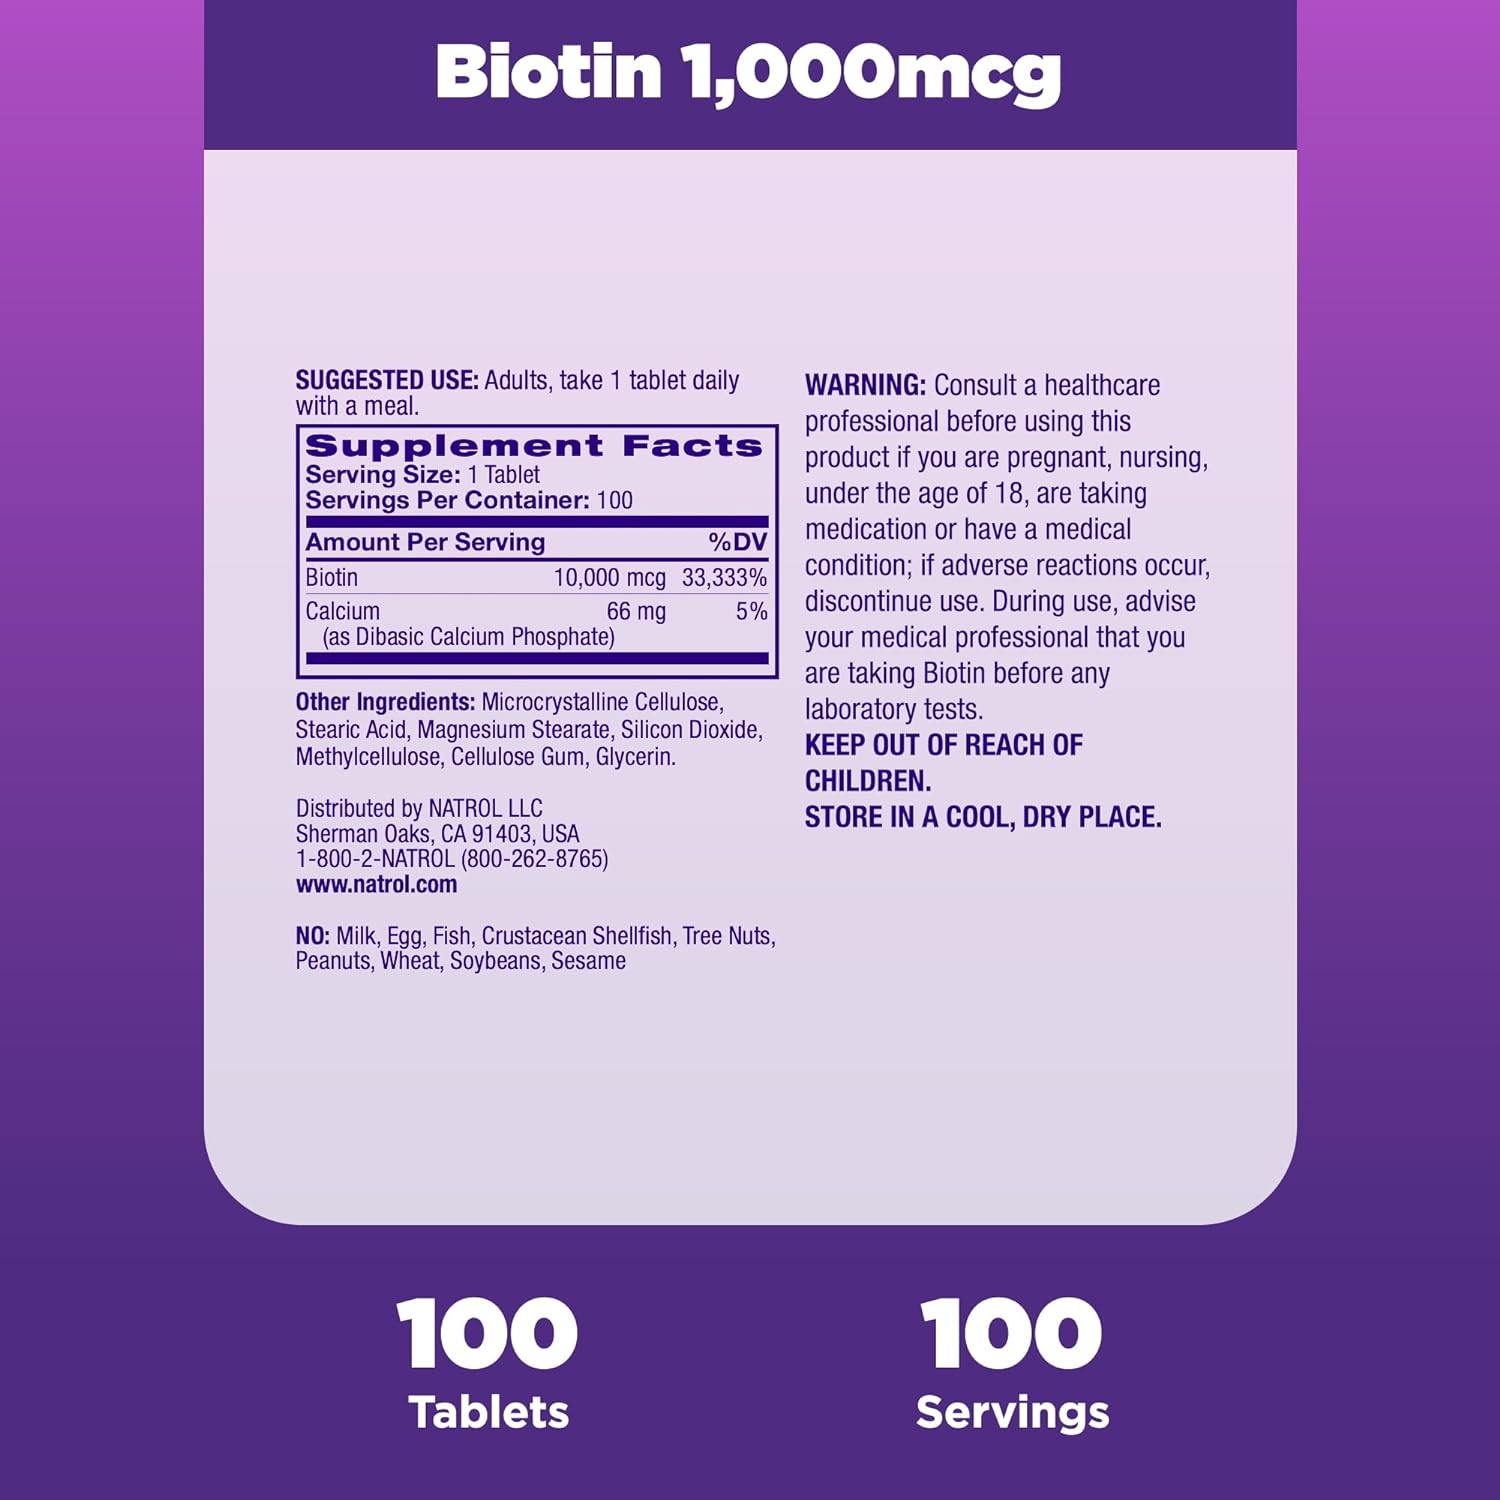 Natrol Biotin Beauty Tablets, Promotes Healthy Hair, Skin and Nails, Helps Support Energy Metabolism, Helps Convert Food Into Energy, Maximum Strength, 10,000mcg, 100 Count (Pack of 1)